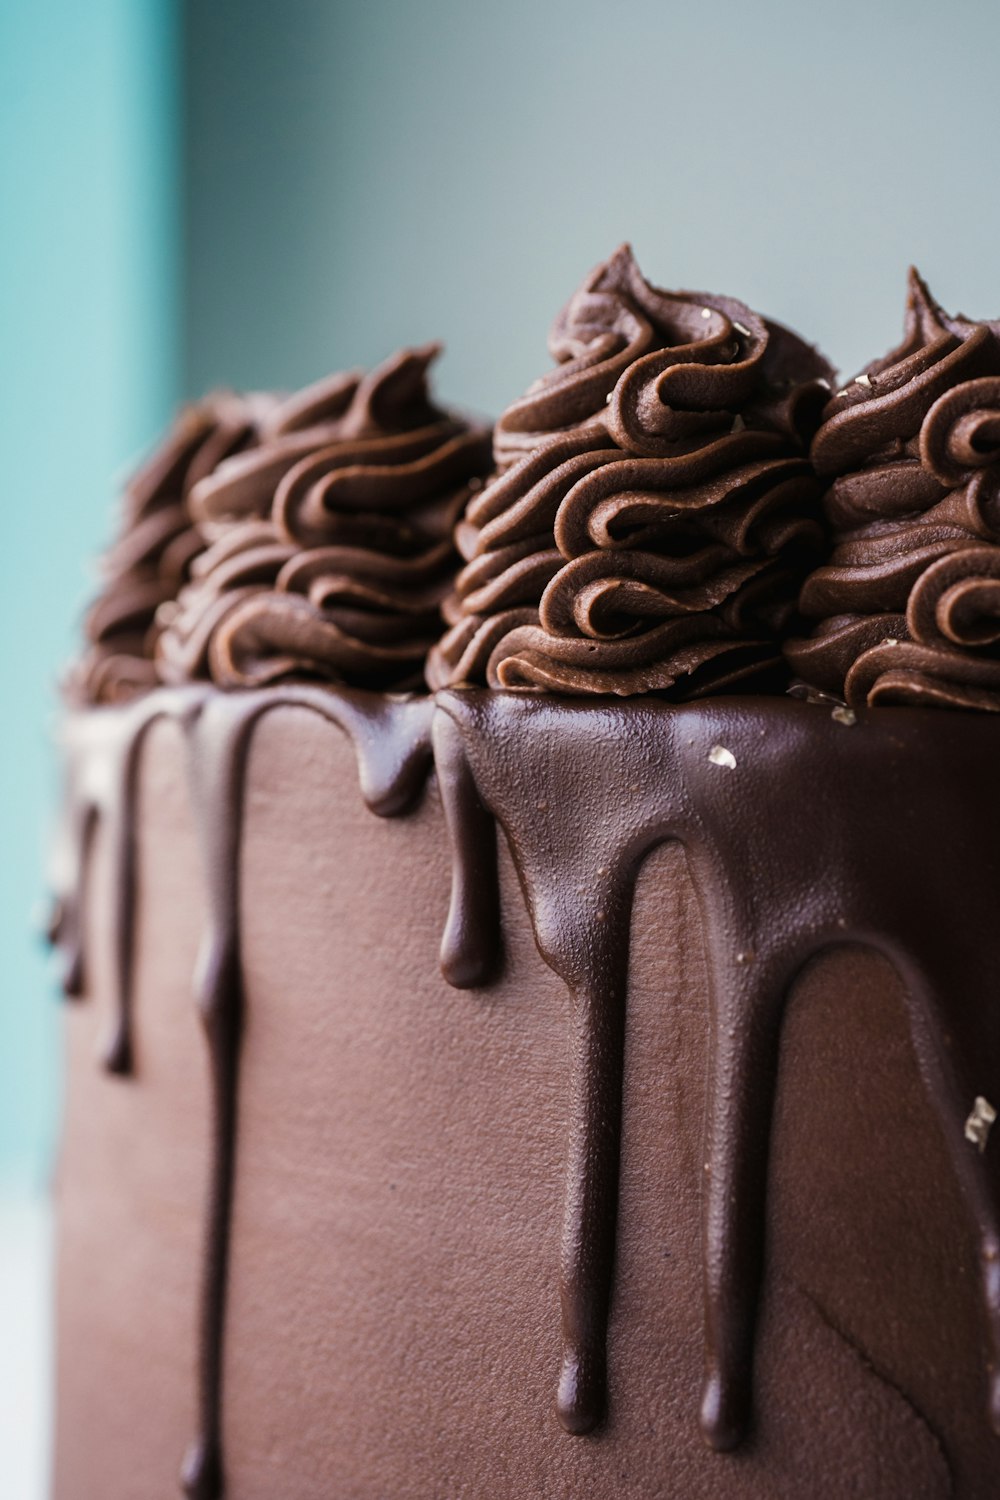 chocolate cake with chocolate toppings